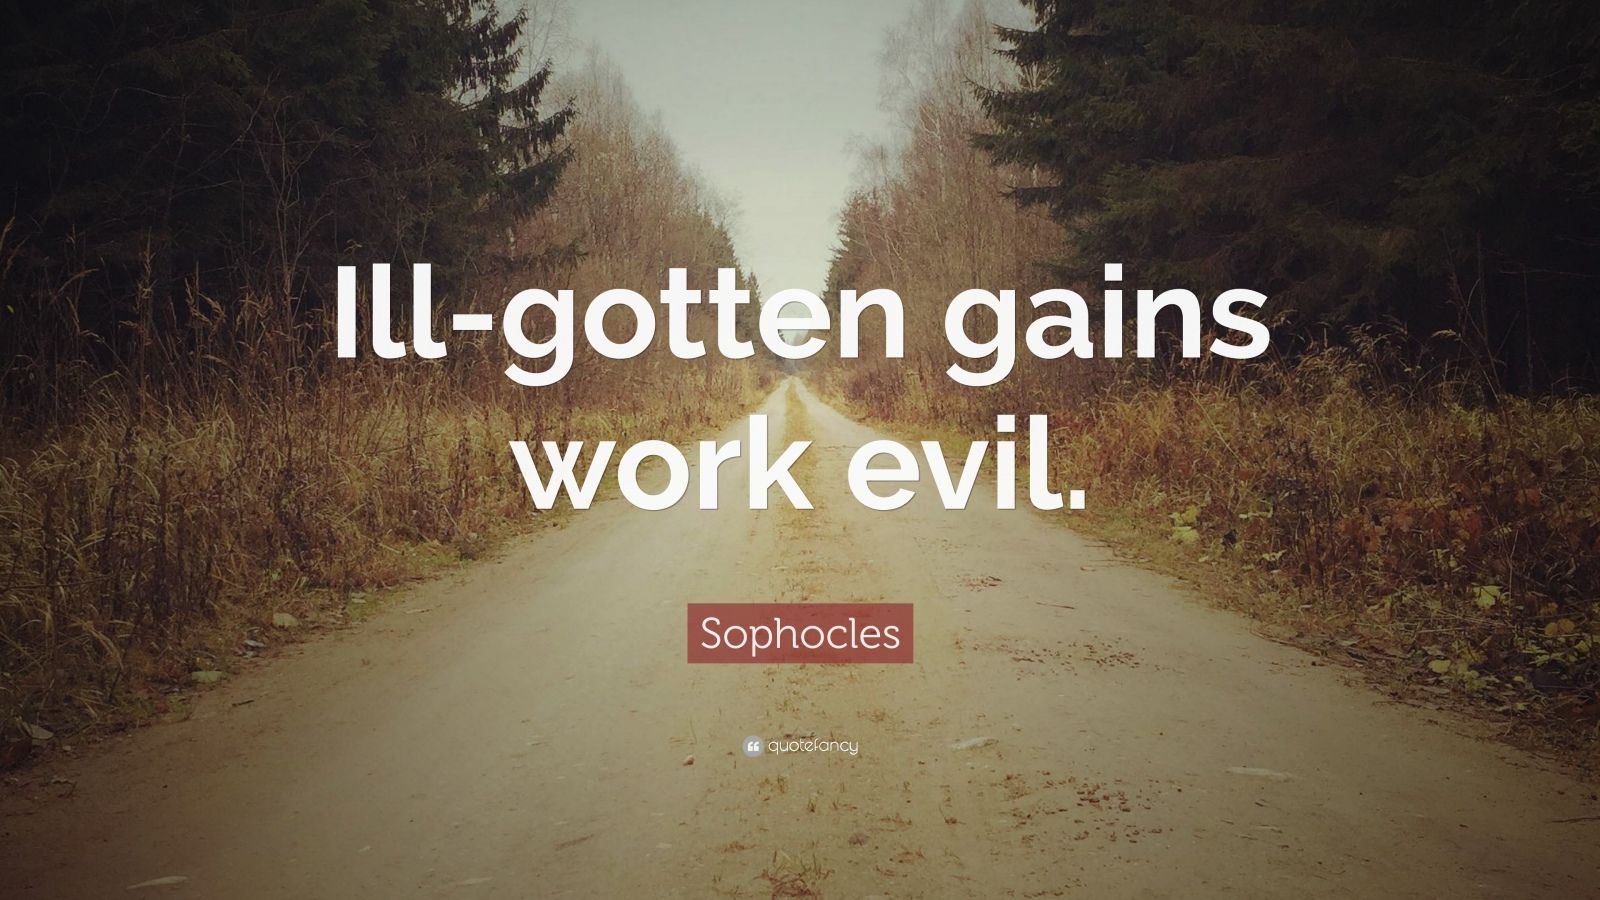 Sophocles Quote: Ill gotten gains work evil